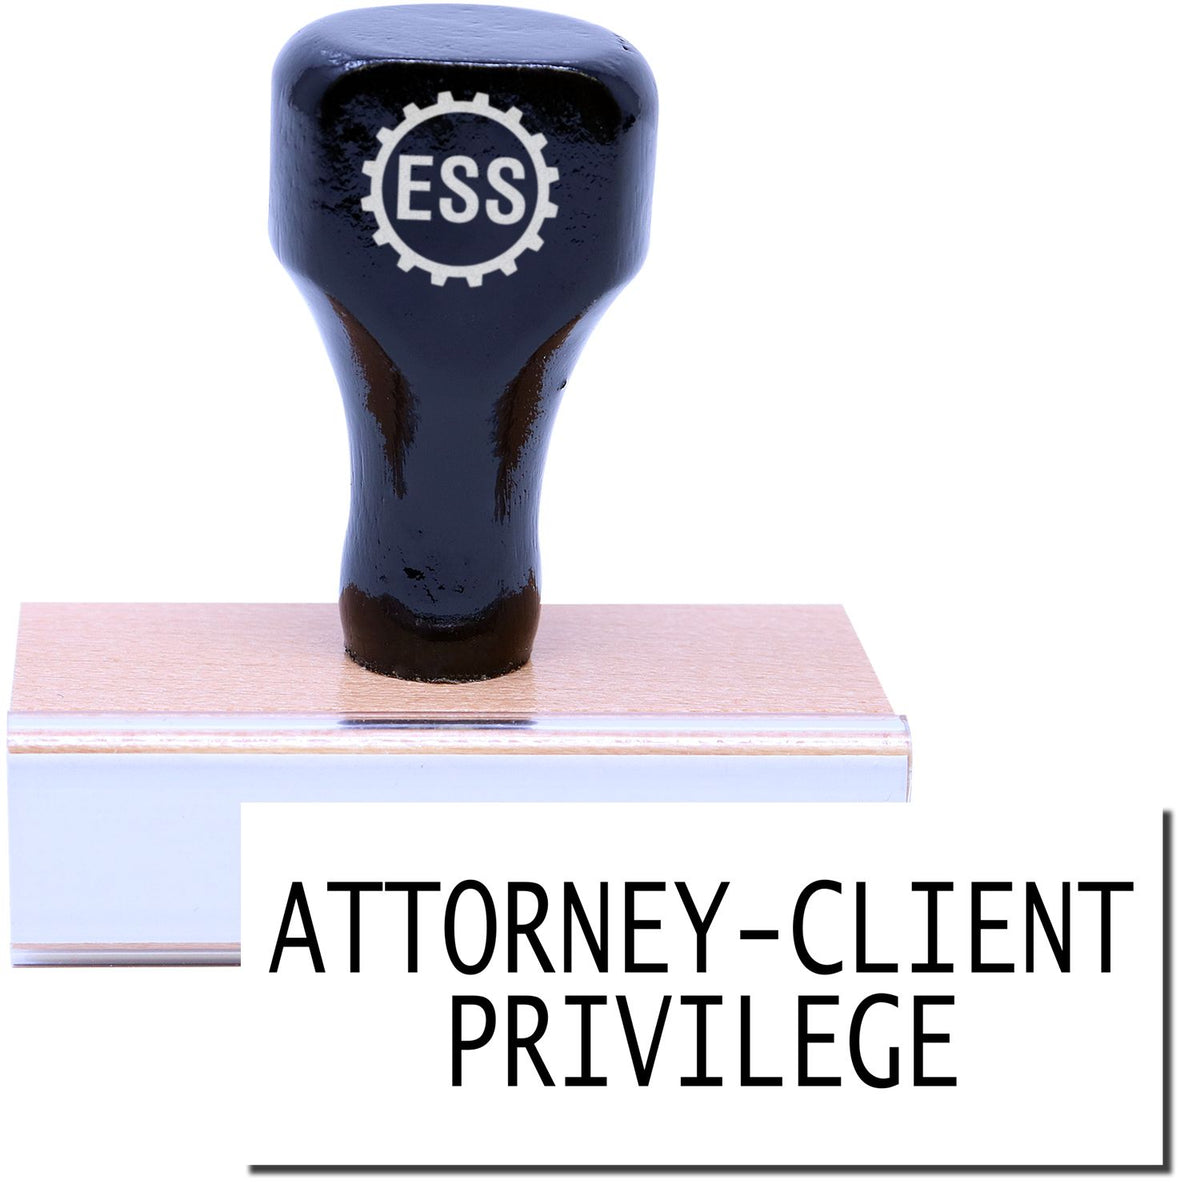 A stock office rubber stamp with a stamped image showing how the text &quot;ATTORNEY-CLIENT PRIVILEGE&quot; is displayed after stamping.